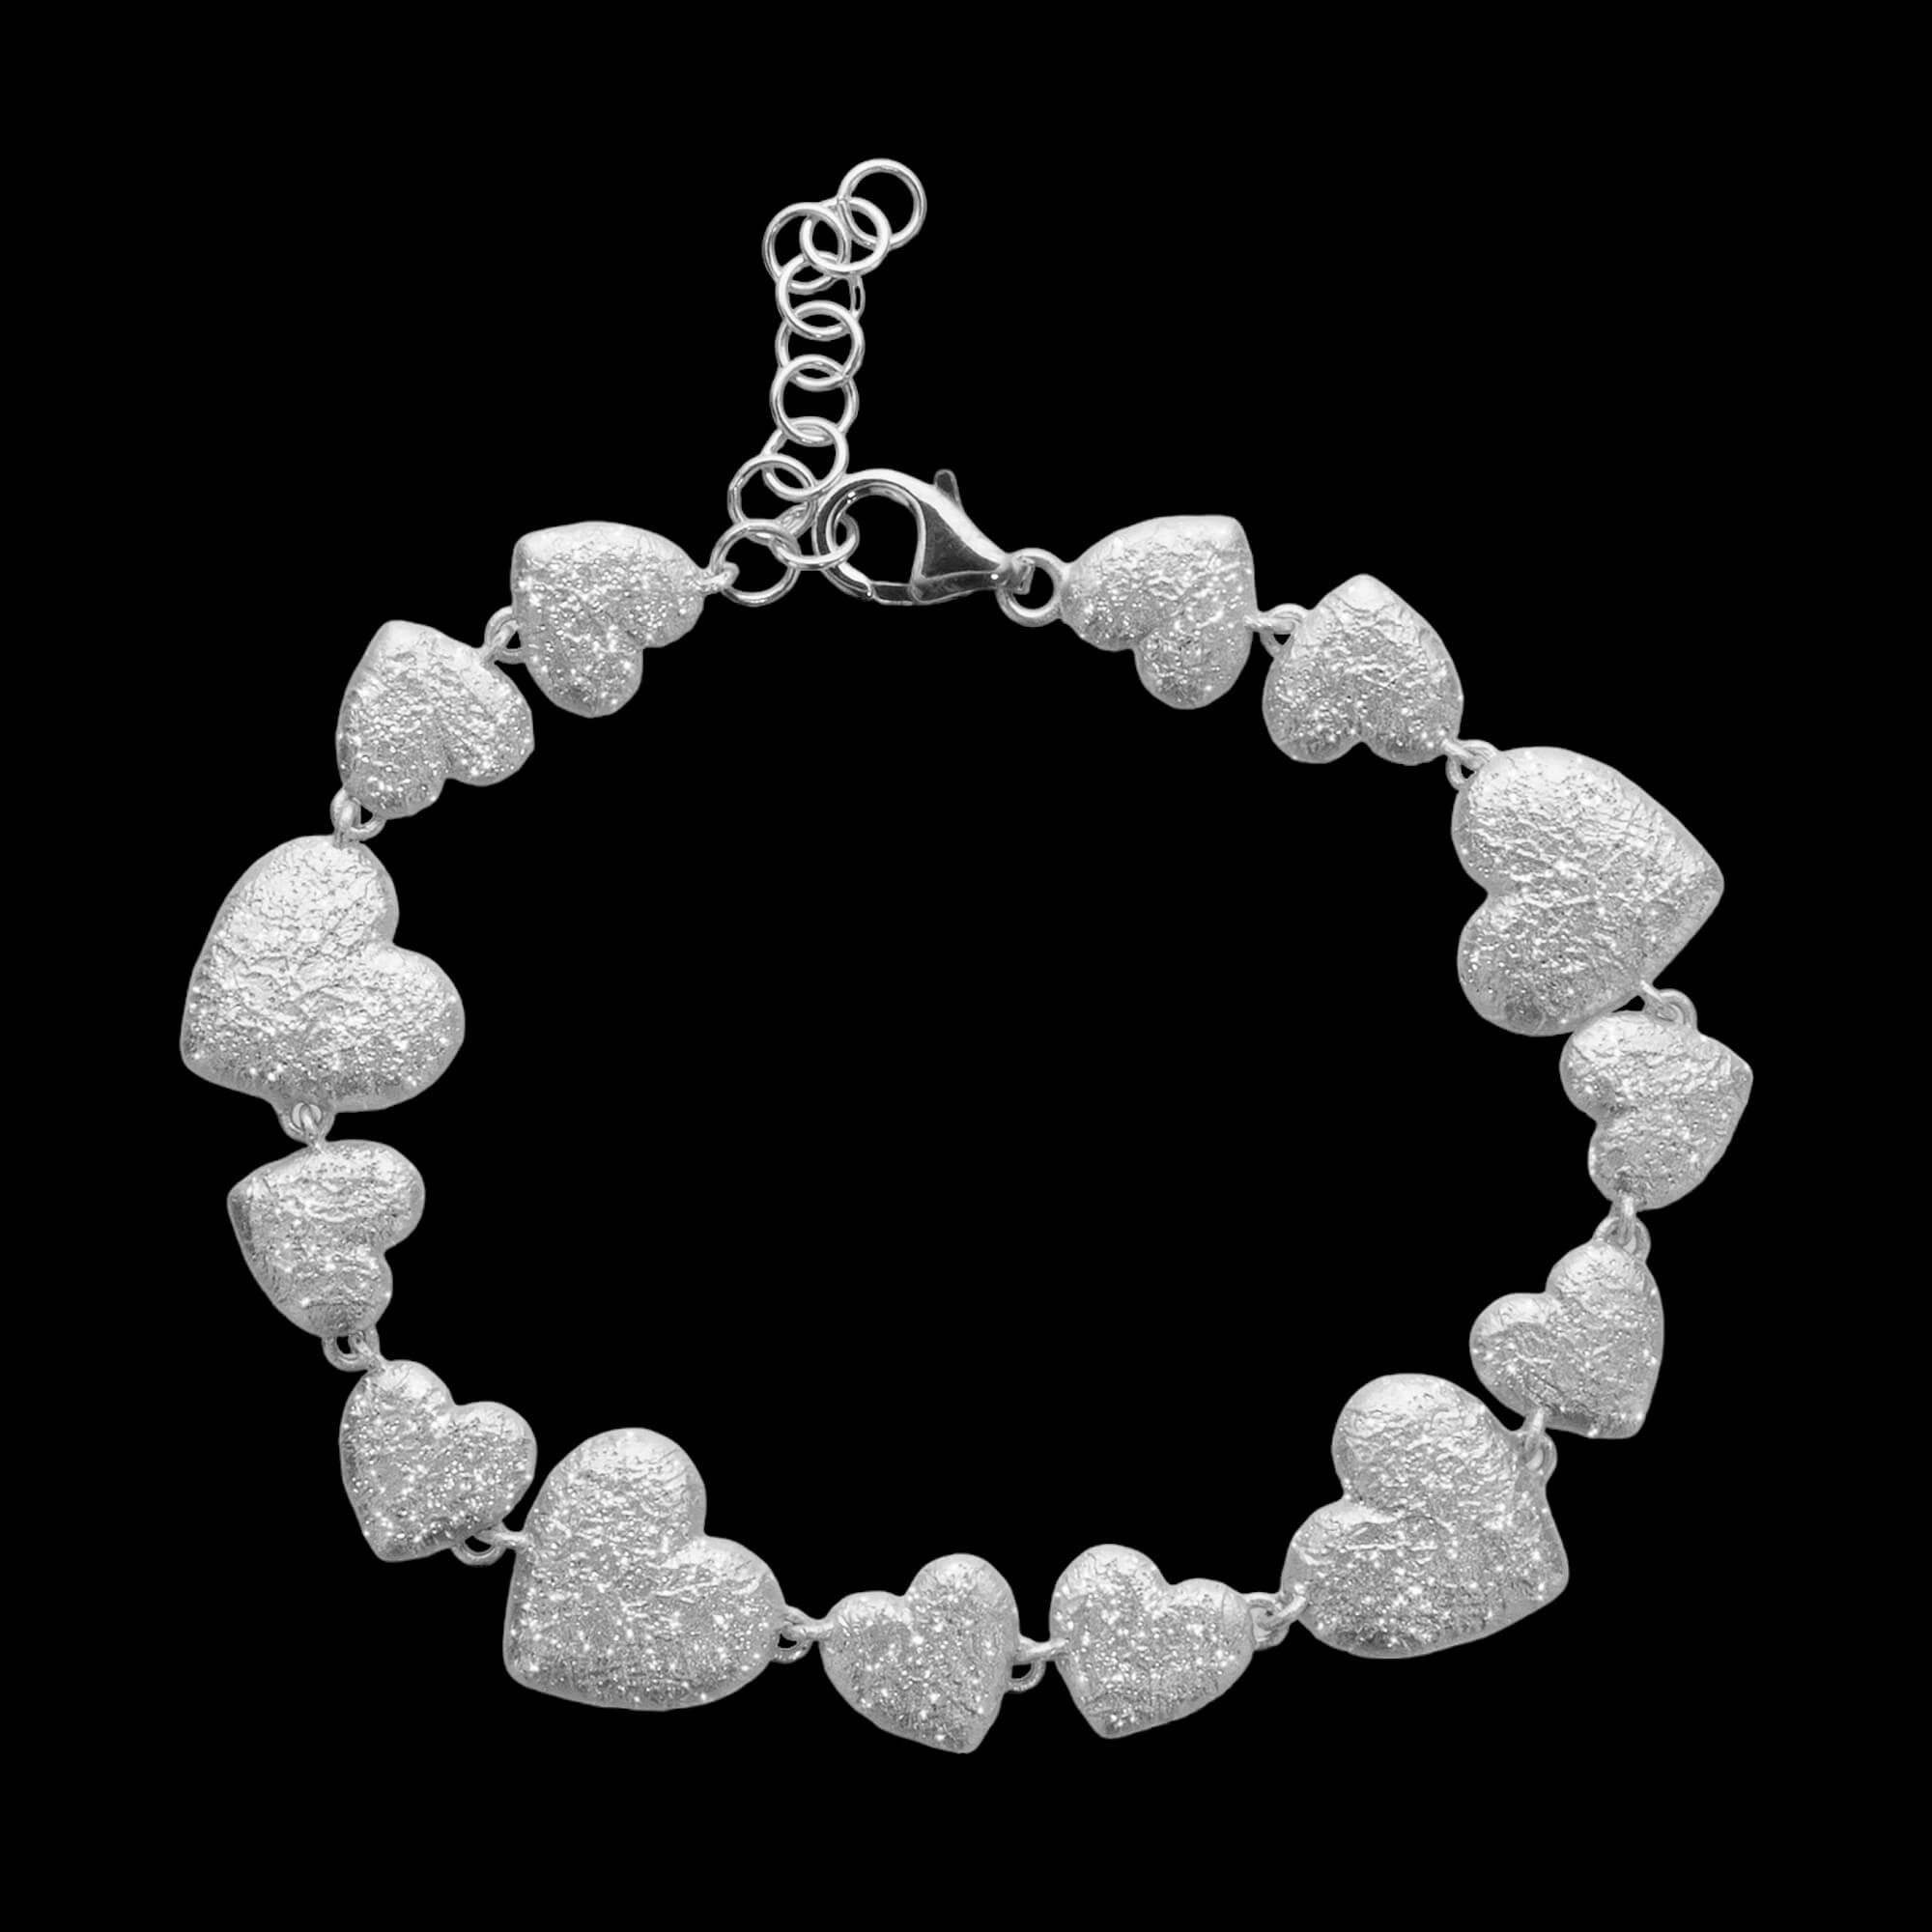 Silver bracelet with multiple hearts